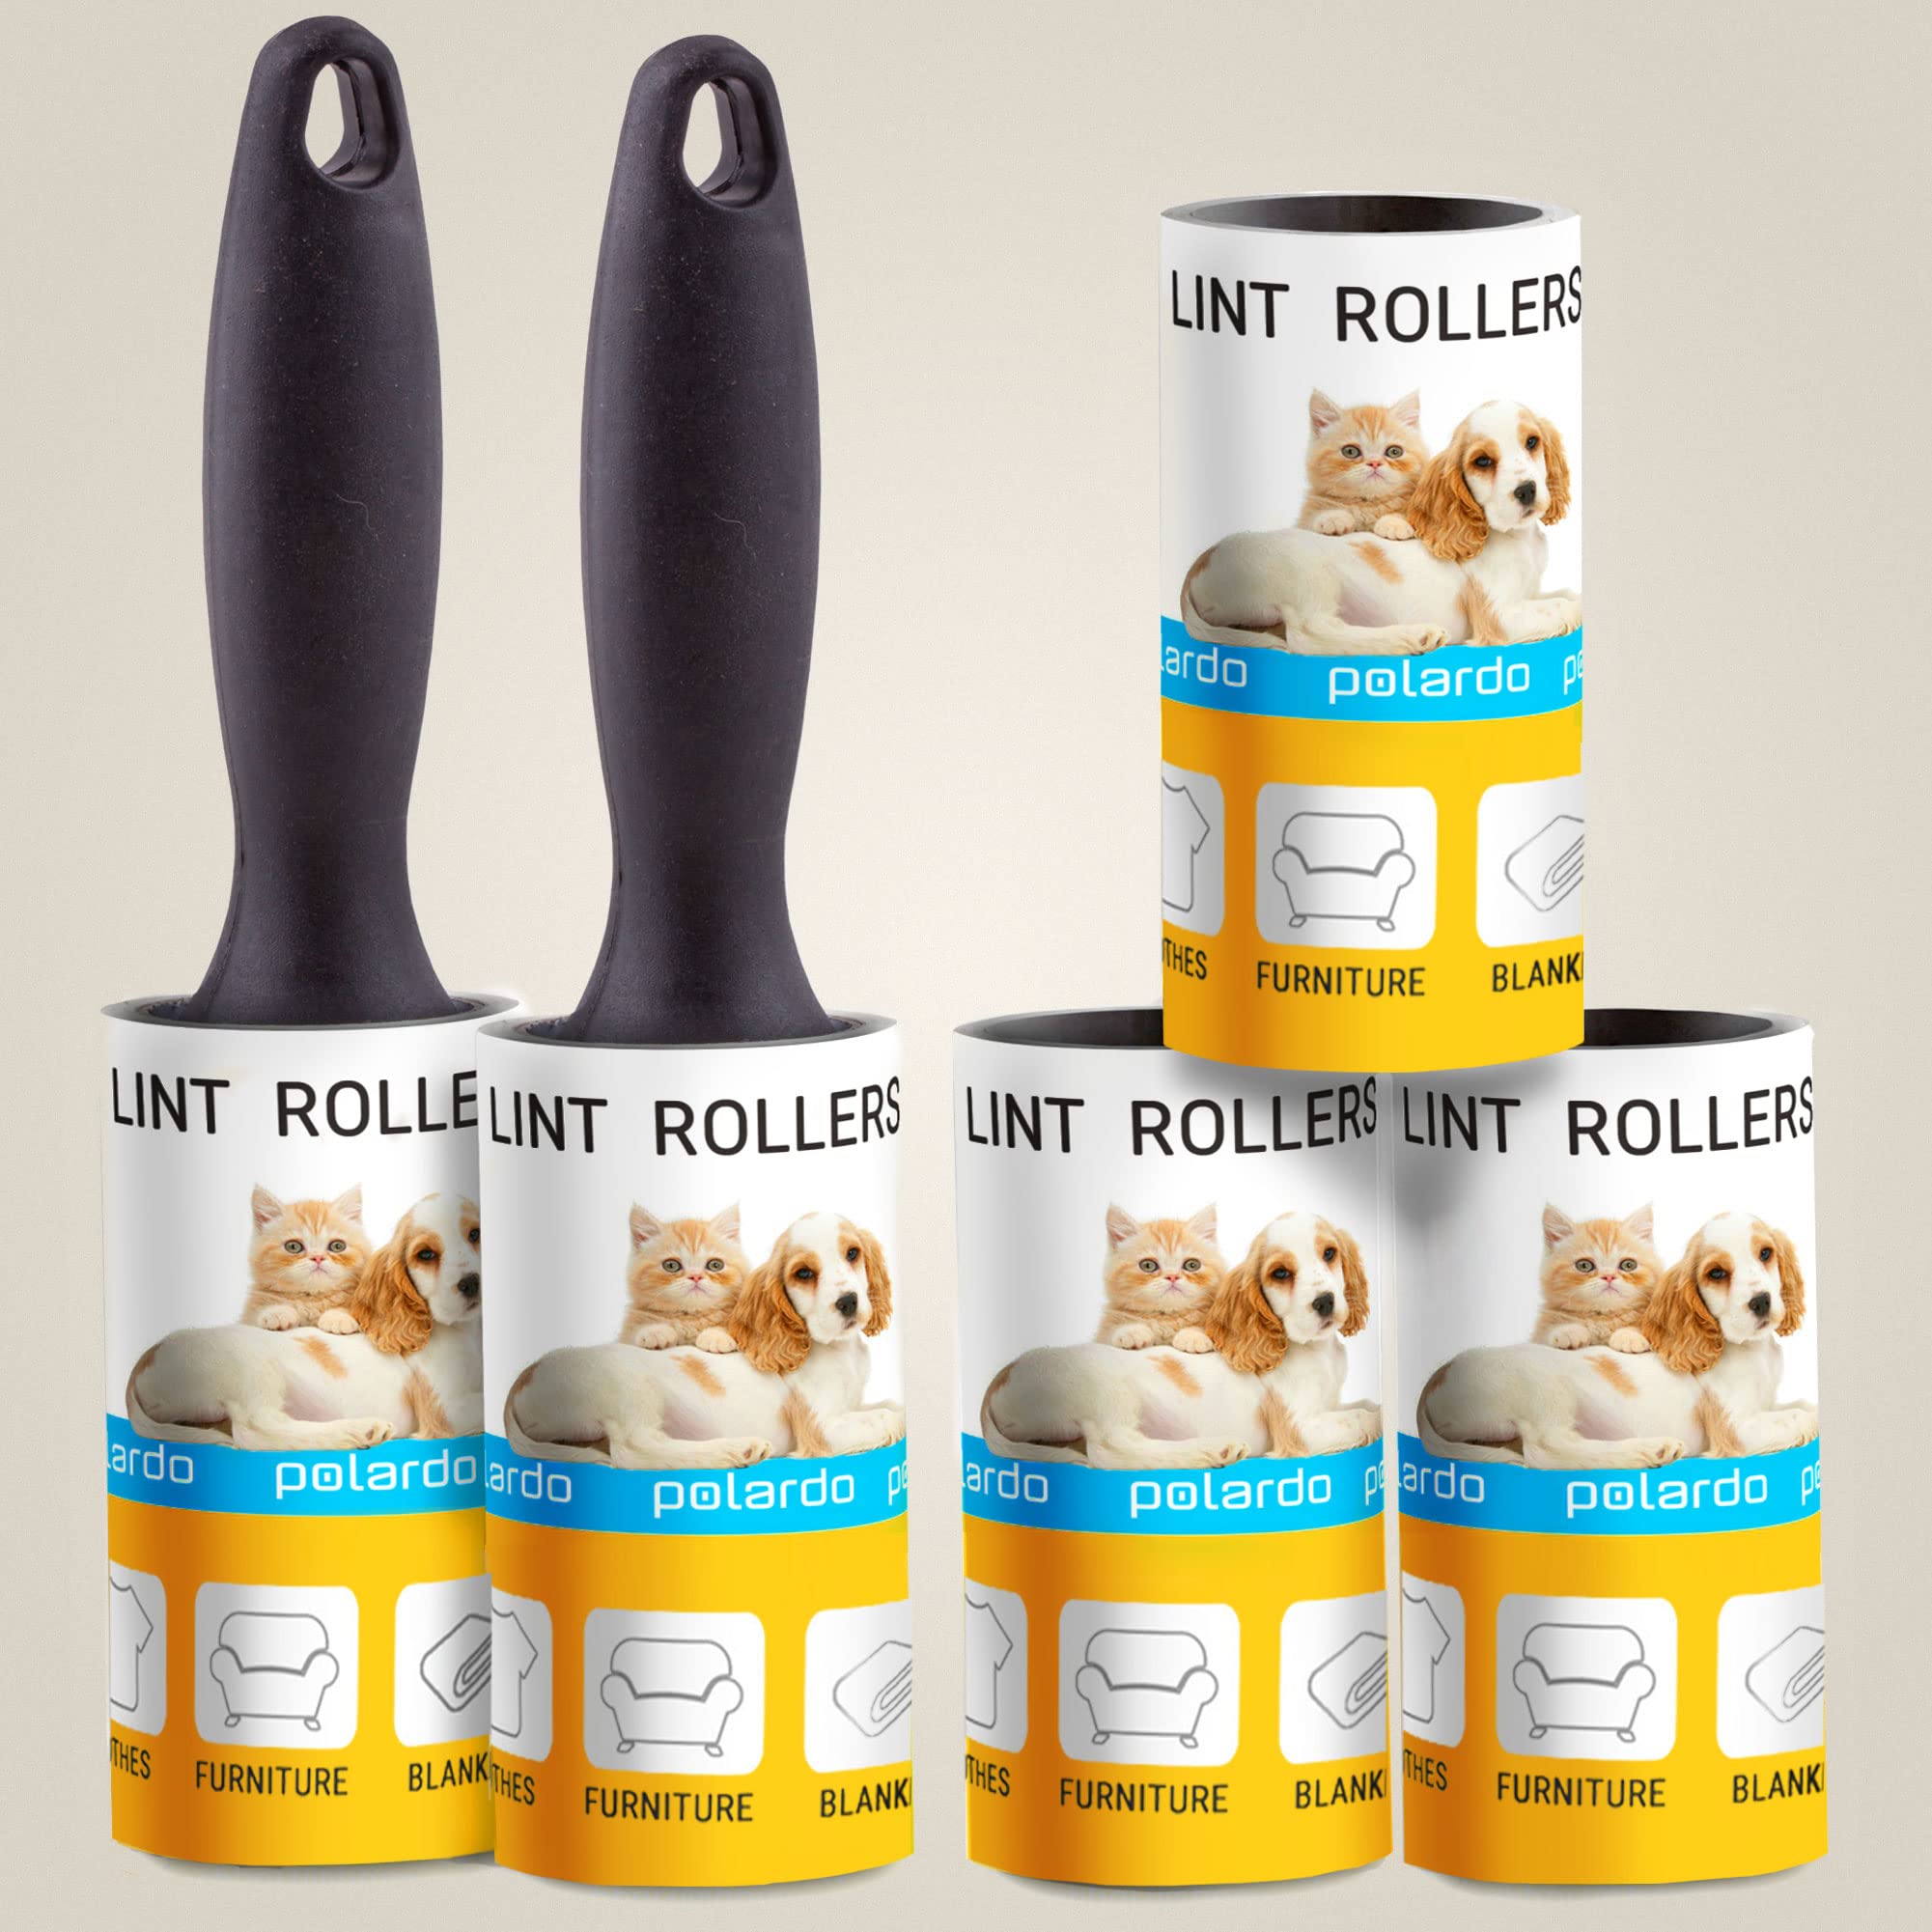 Lint Rollers for Pet Hair, Sticky, Remover for Couch, Clothes